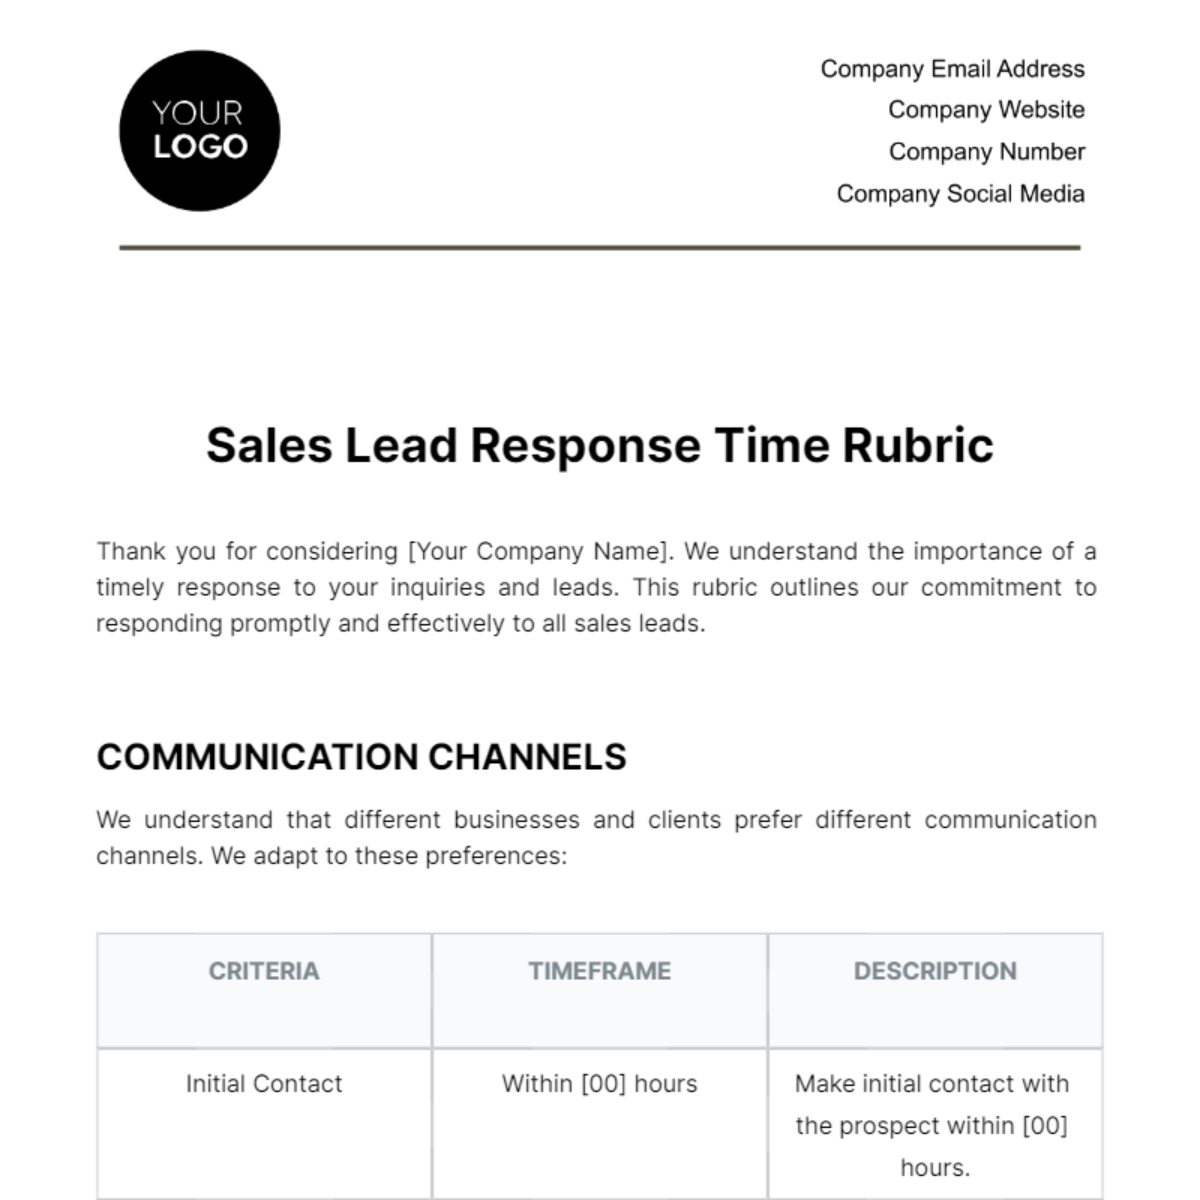 Free Sales Lead Response Time Rubric Template